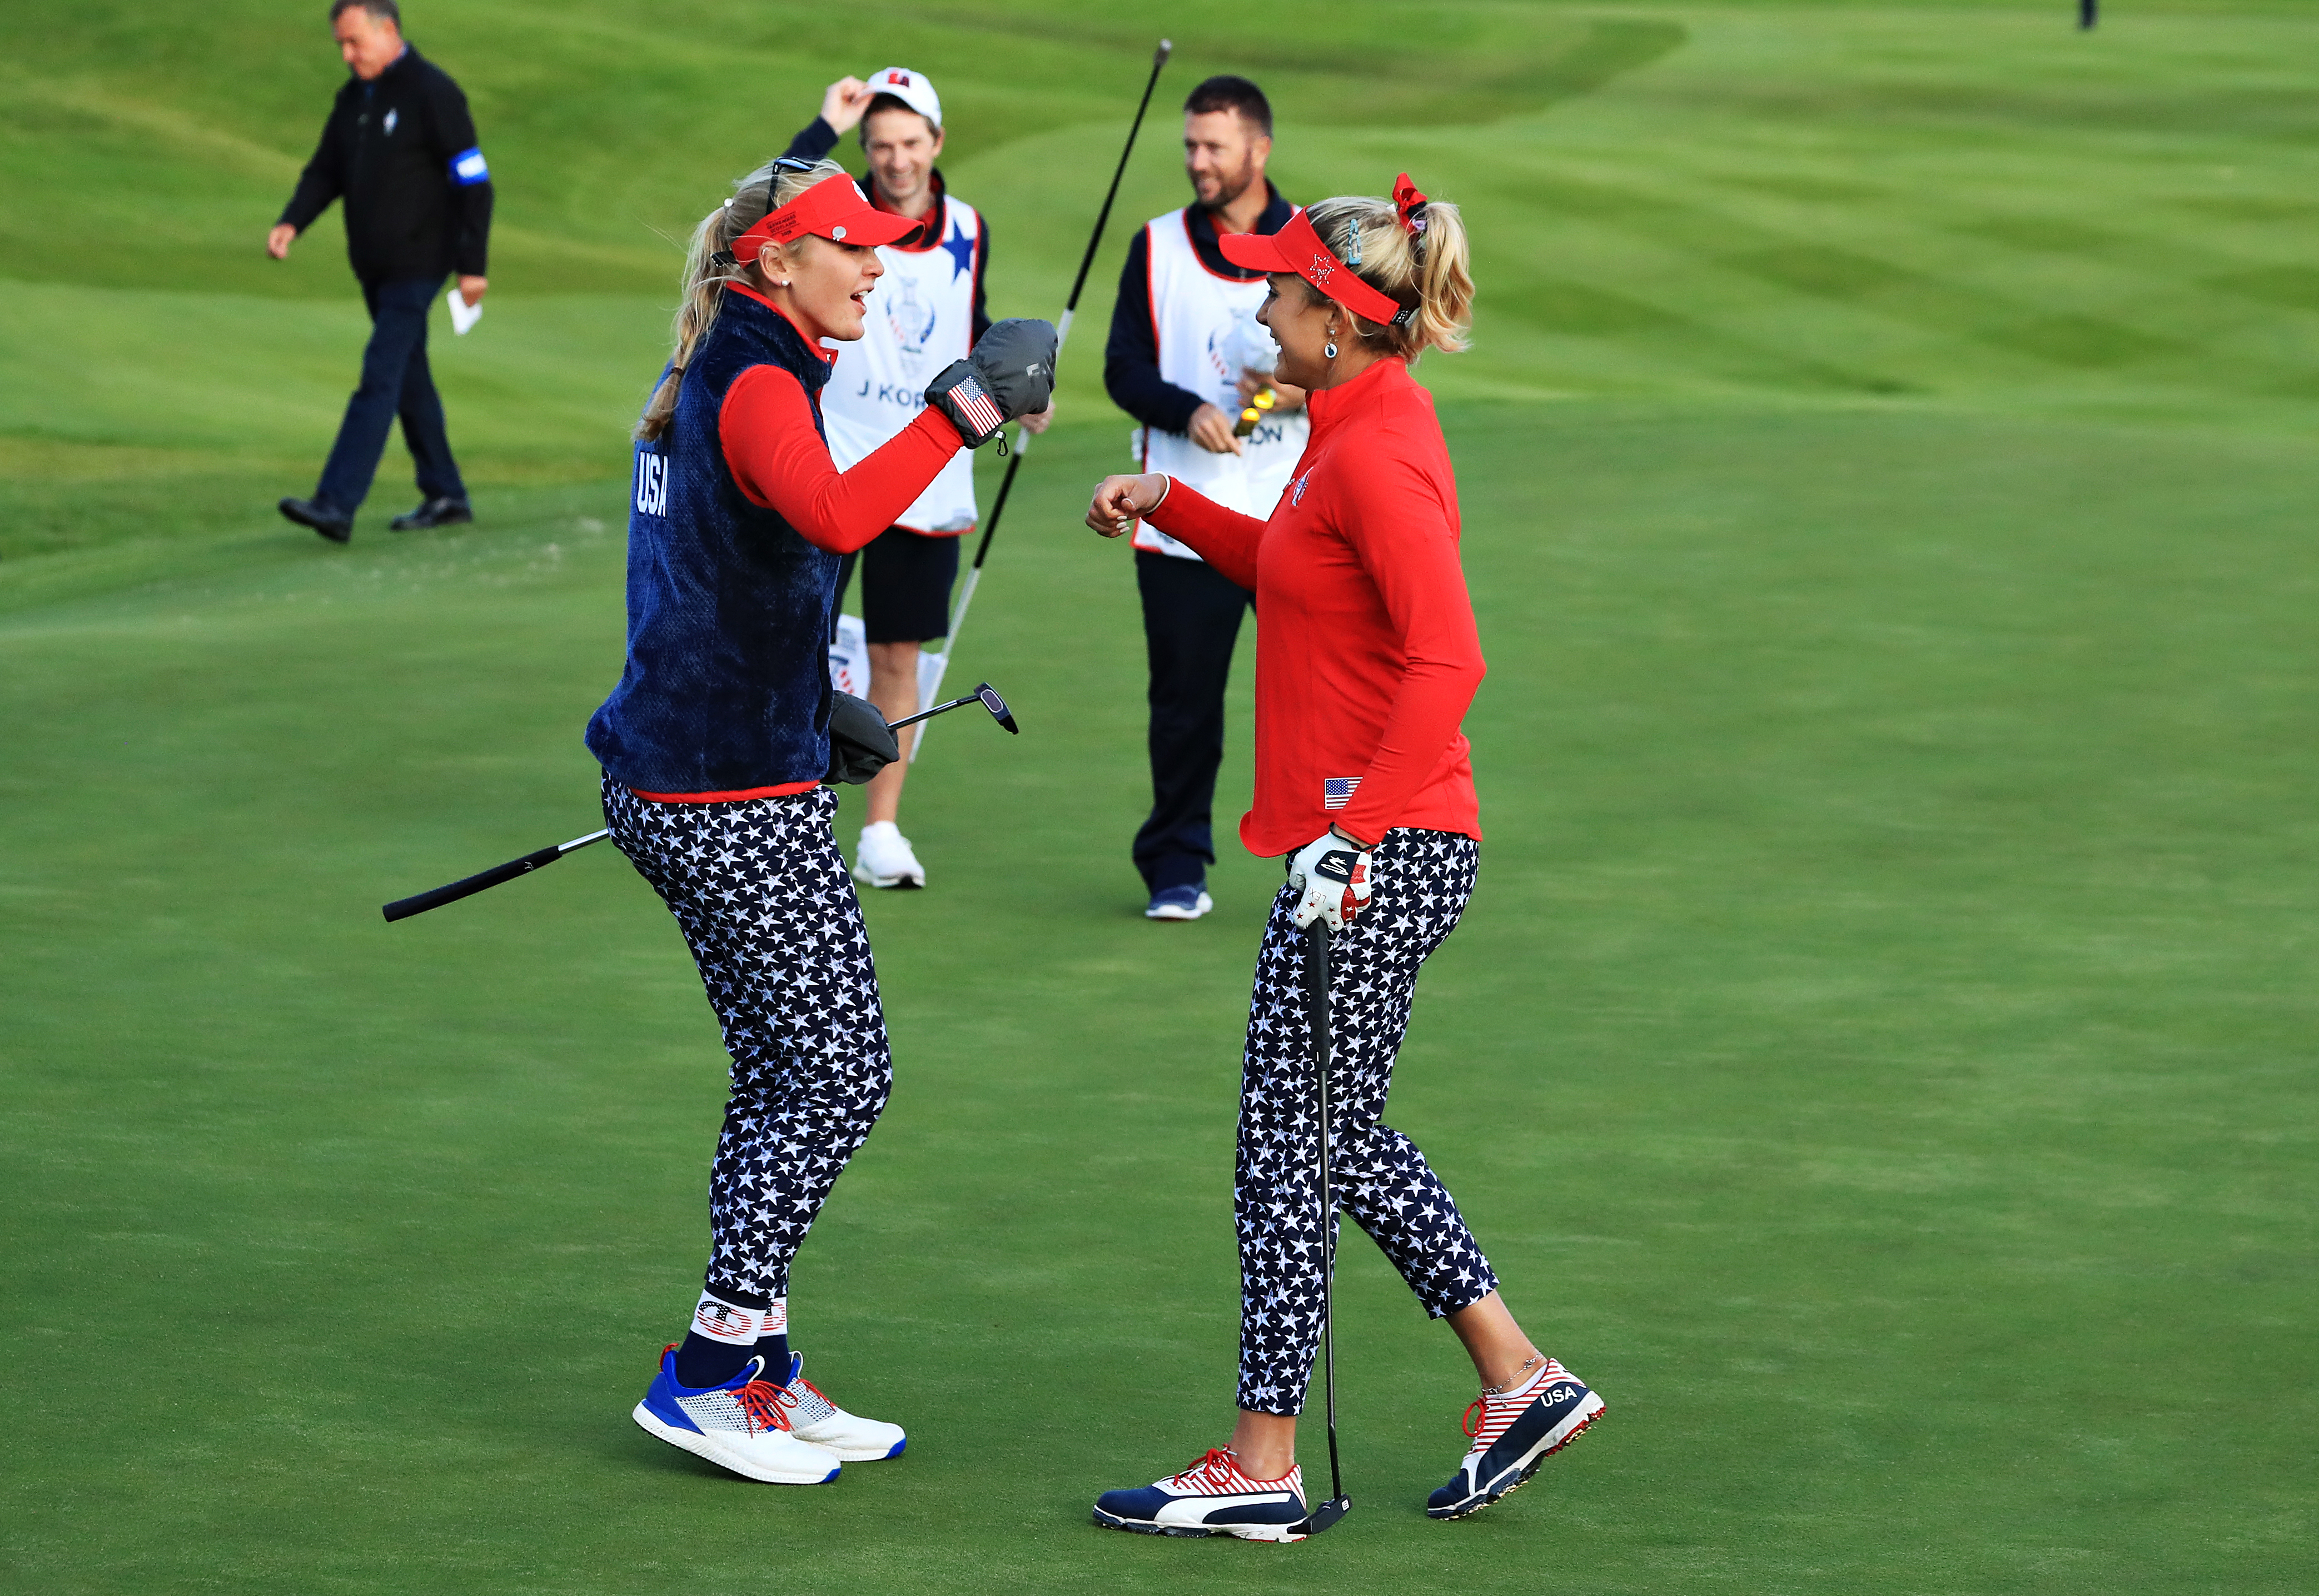 Lexi Thompson (l) and Jessica Korda of Team USA celebrate after securing a half to restrict Europe's lead on the first day of the Solheim Cup.